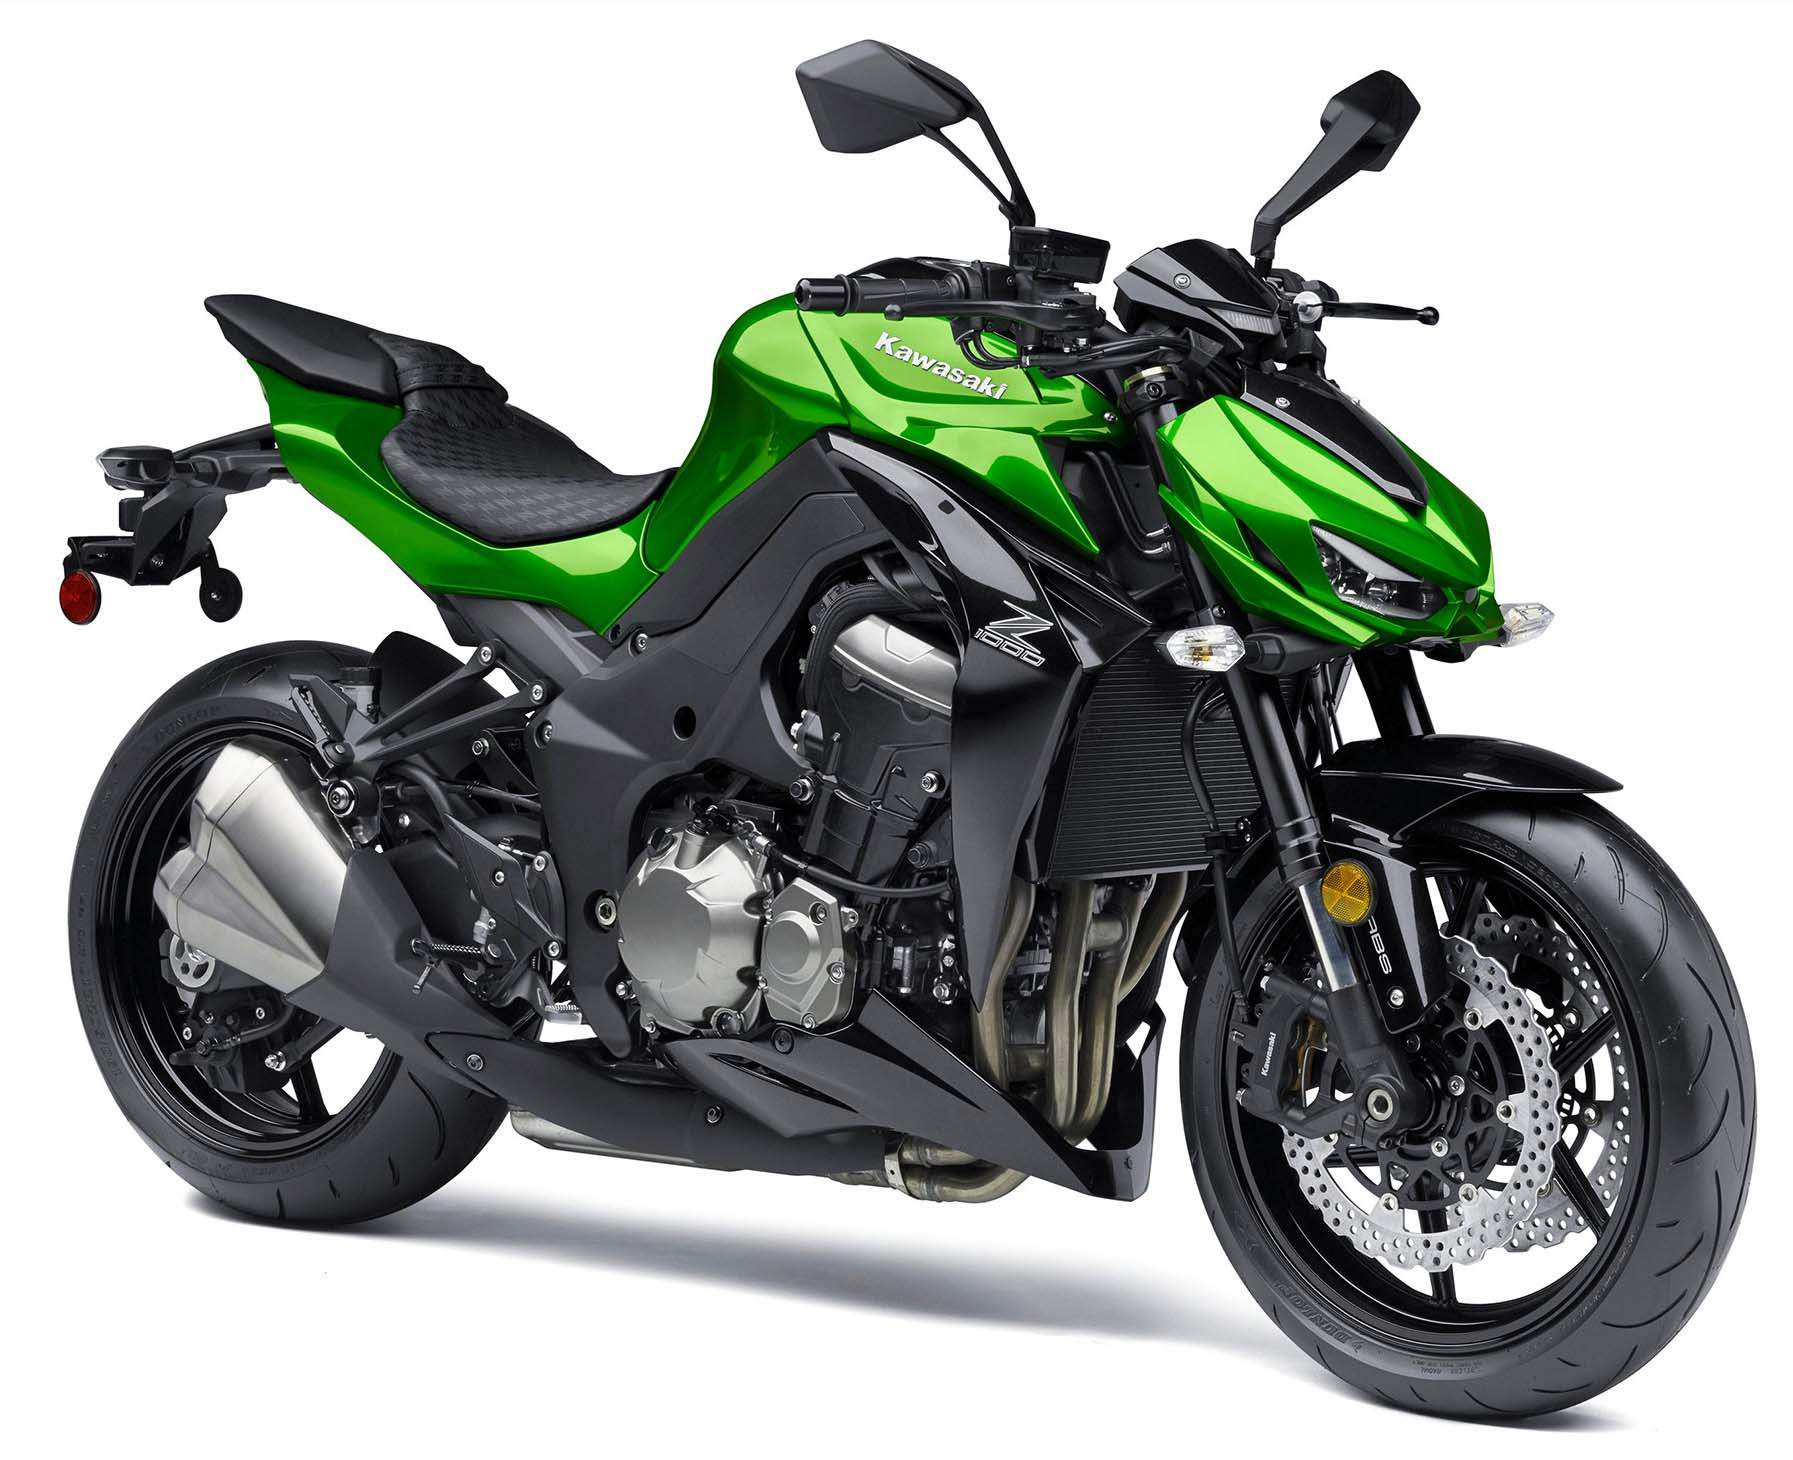 Kawasaki Z 1000 ABS technical specifications